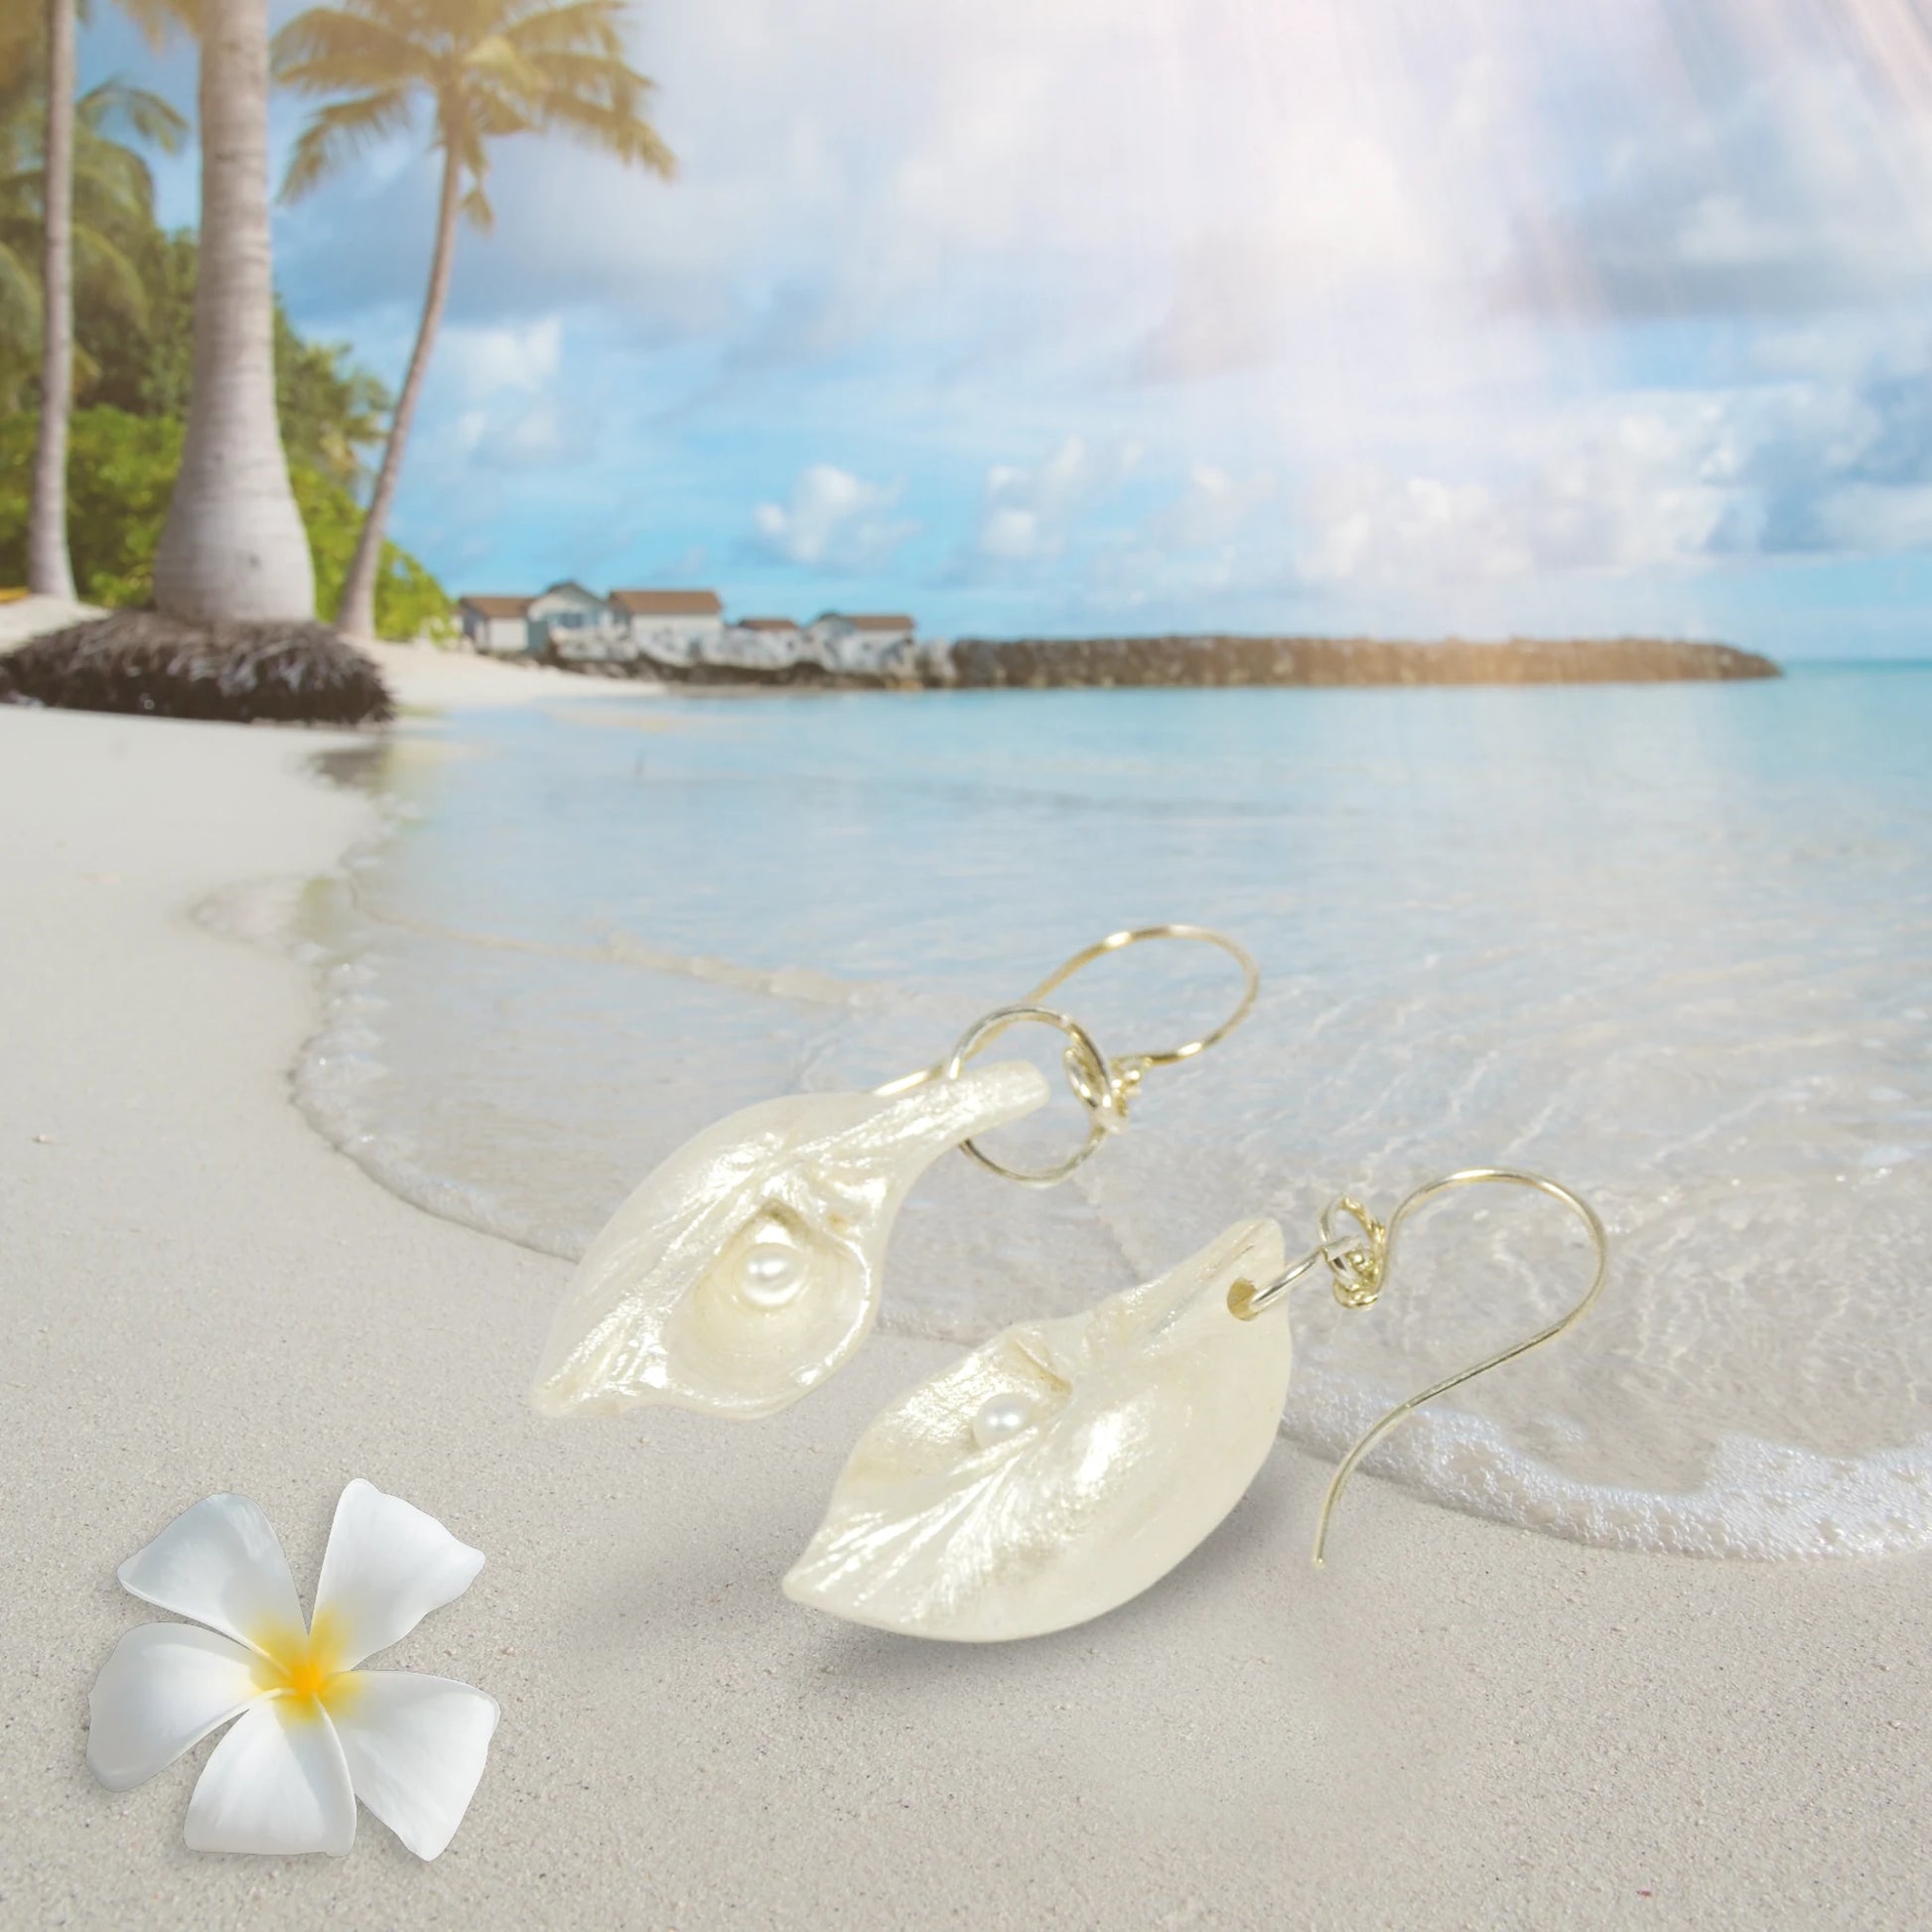 Harmony Earrings made of natural seashells and real freshwater pearls.  The earring are shown on the beach at low tide.